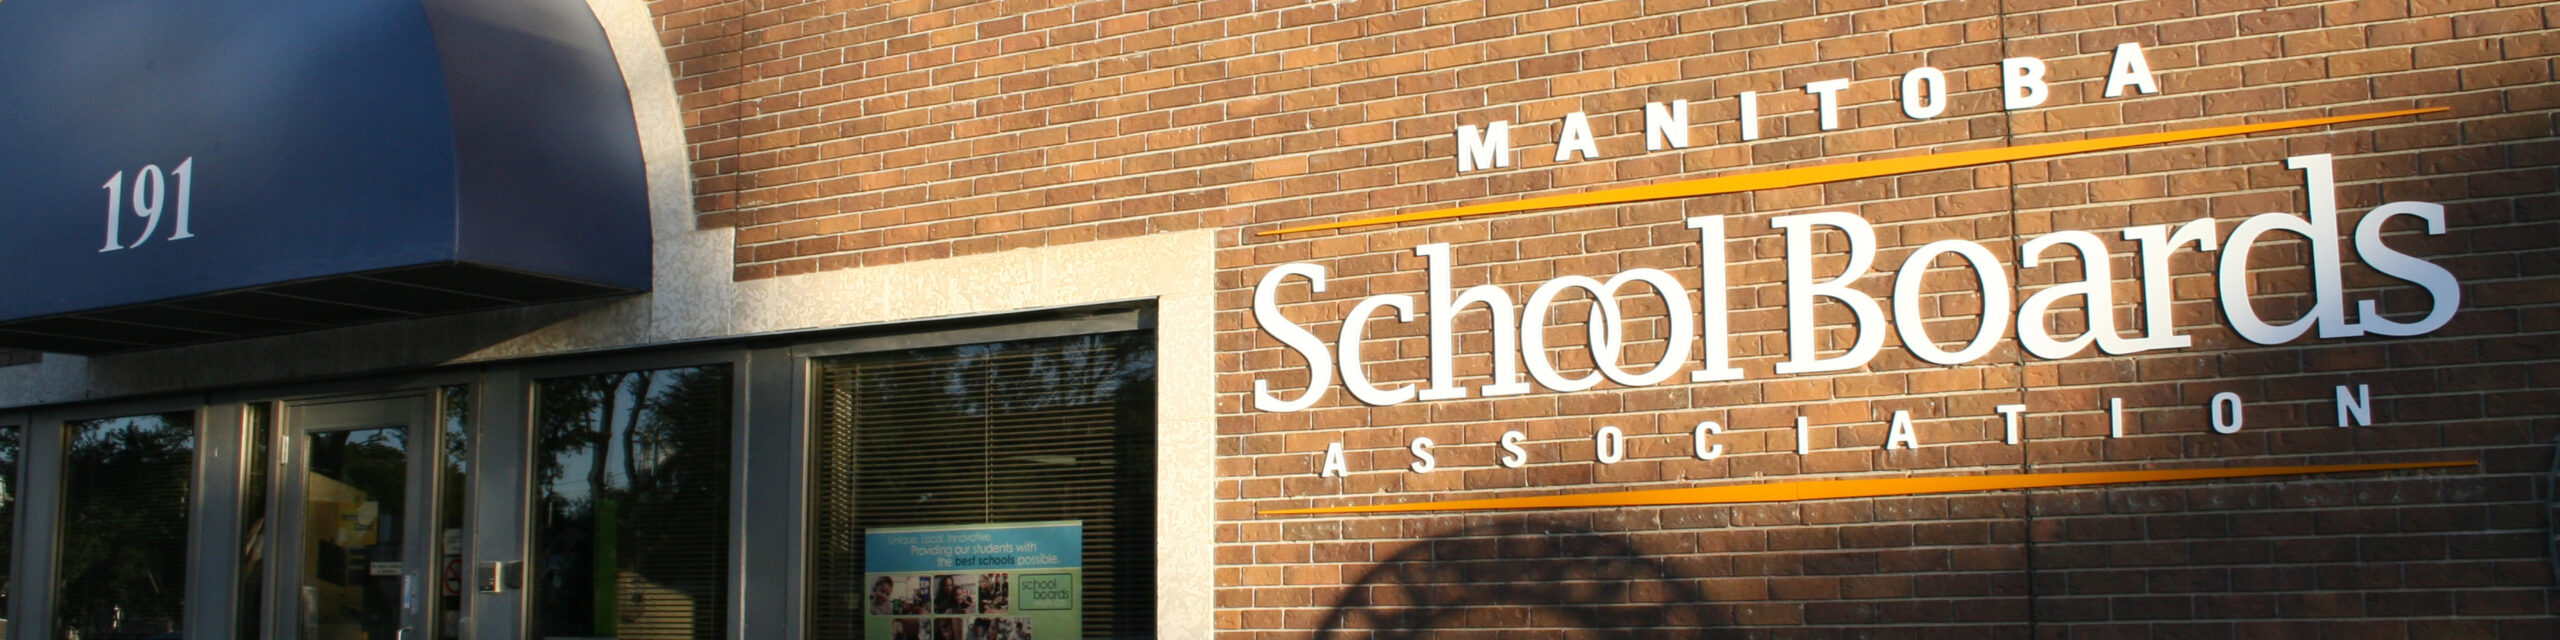 Featured Image For “Manitoba School Boards Association”